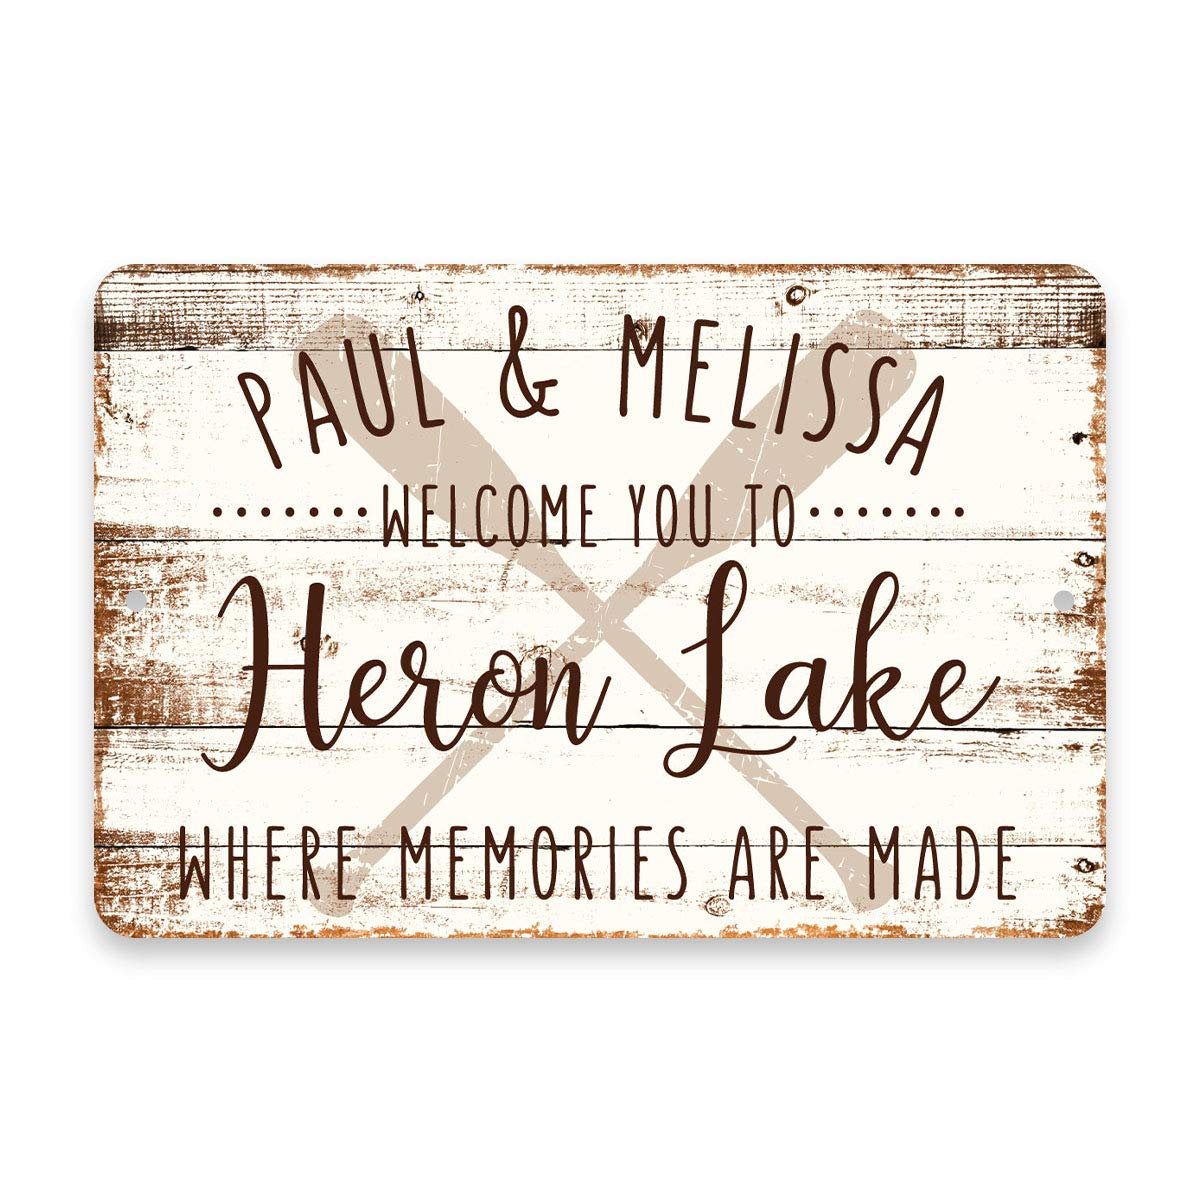 Personalized Welcome to Heron Lake Where Memories are Made Sign - 8 X 12 Metal Sign with Wood Look